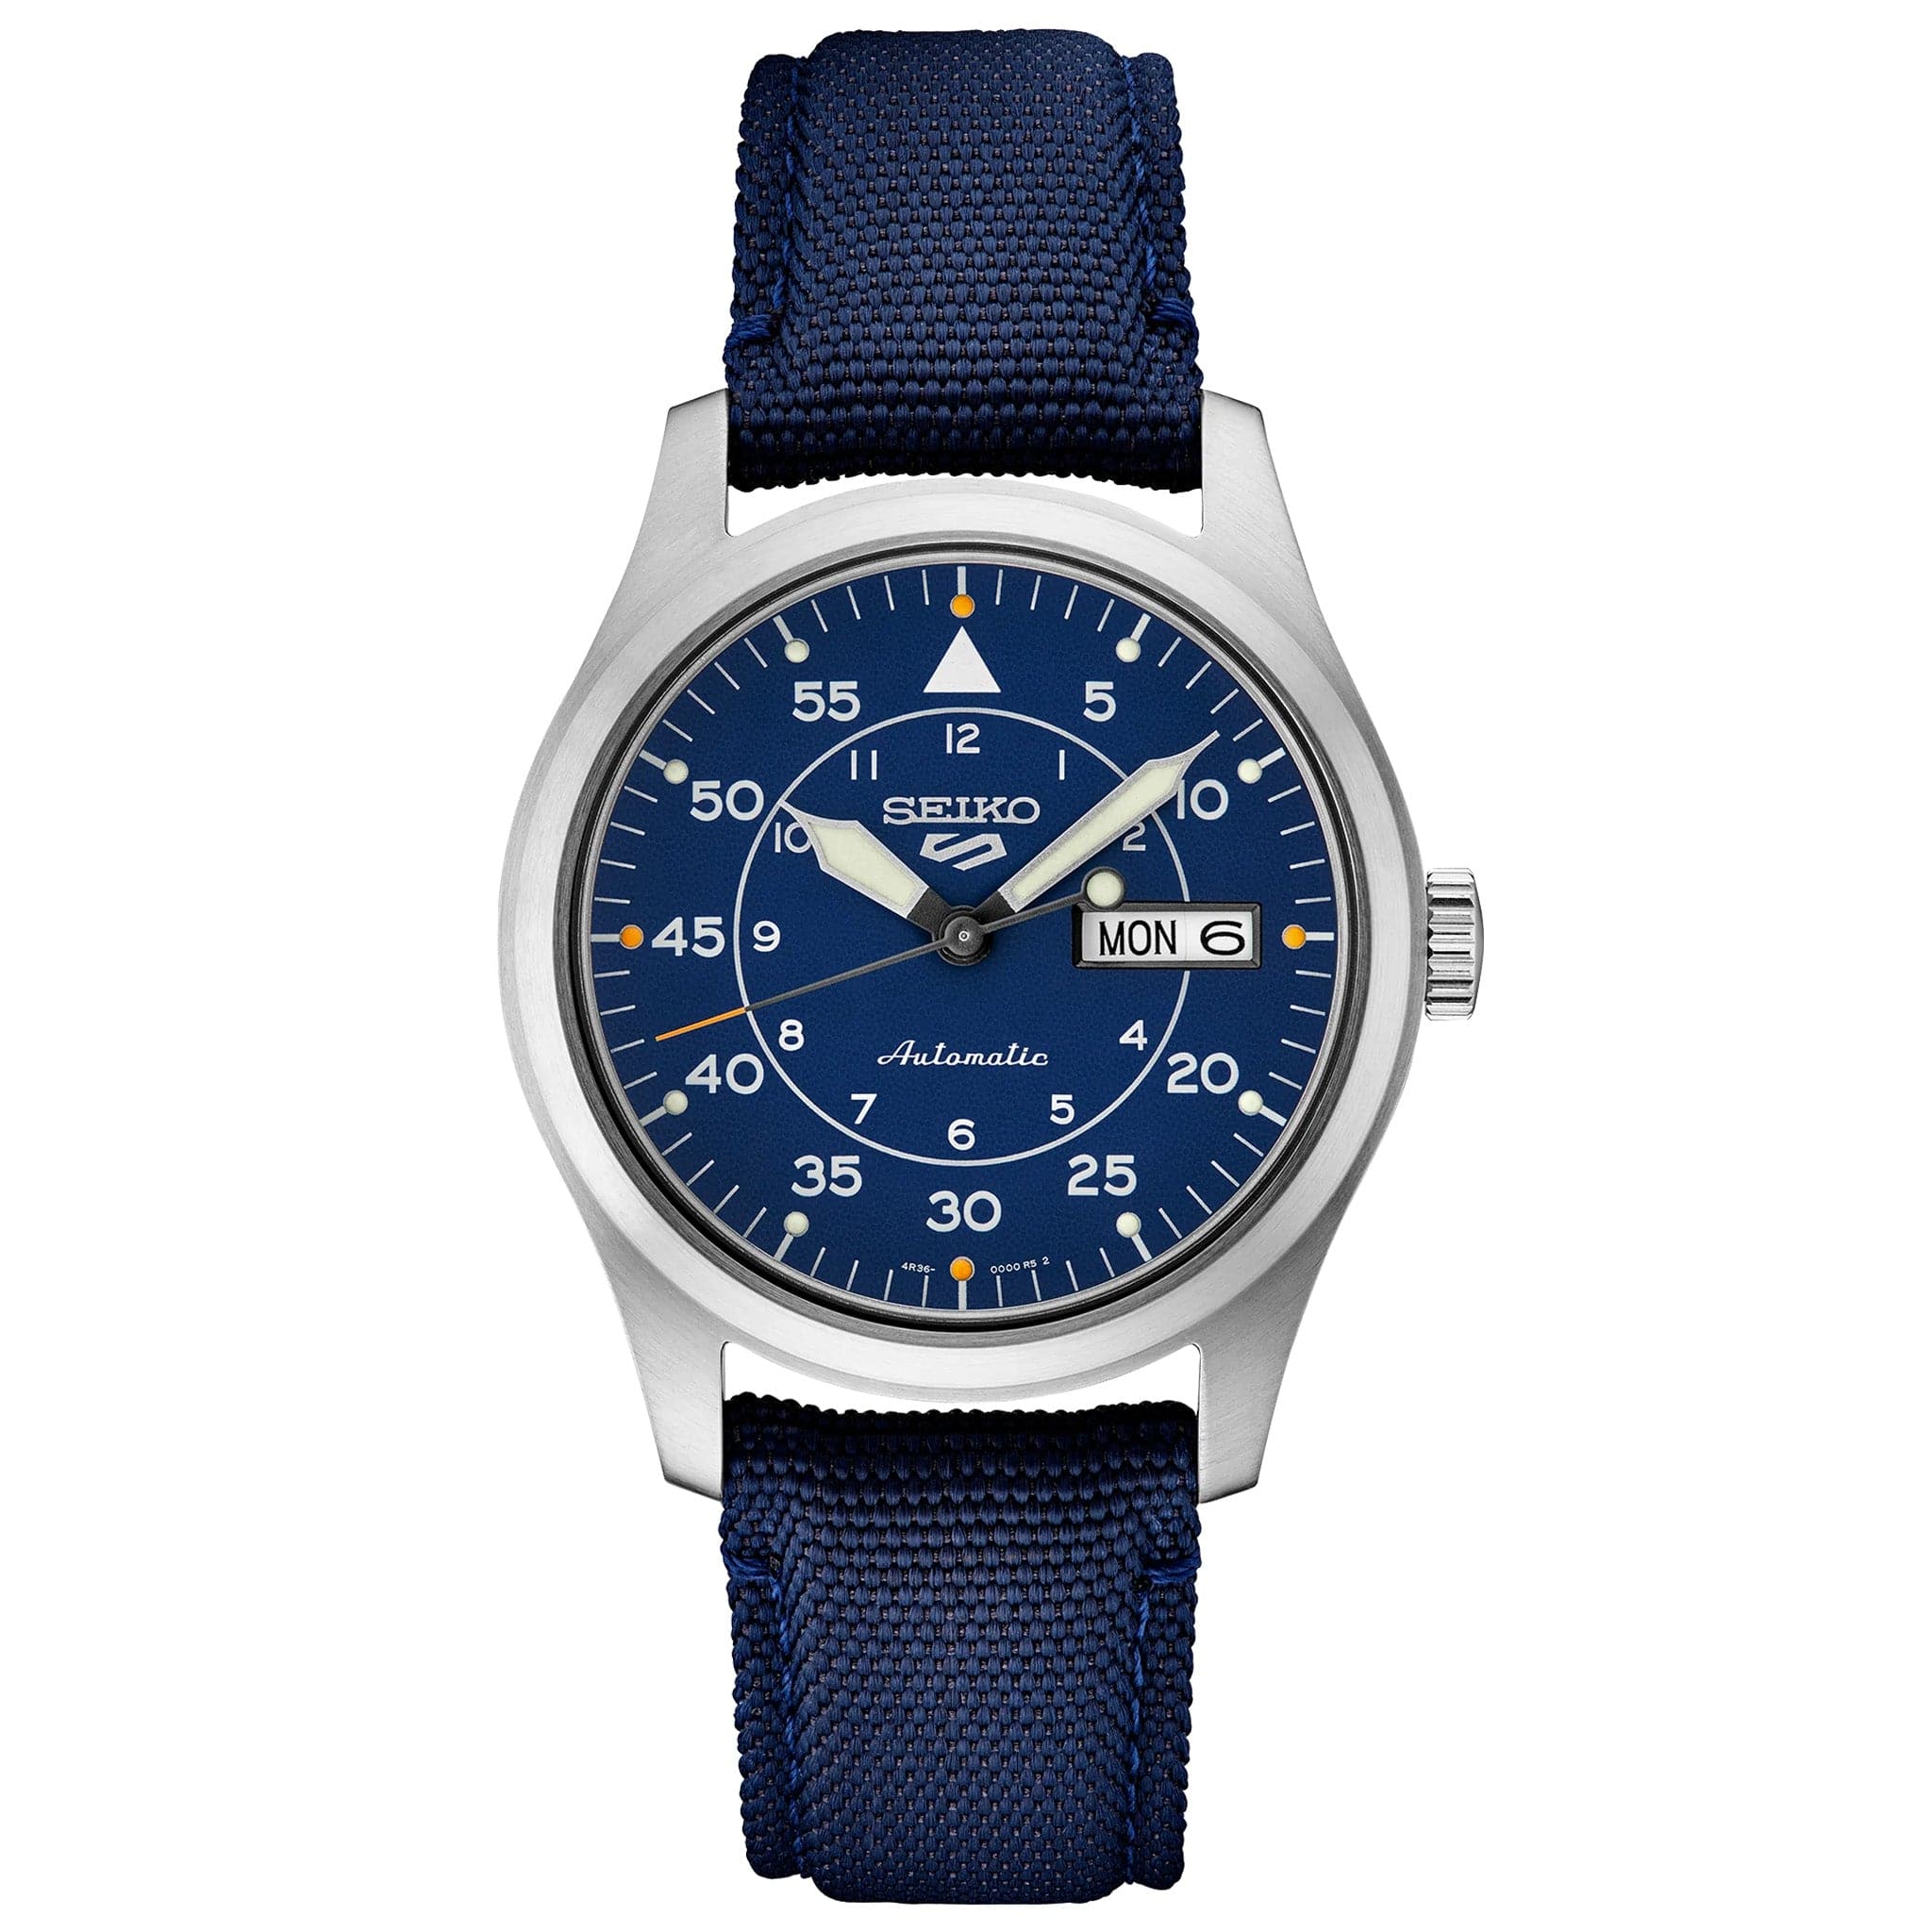 Seiko 5 Sports SRPH31 Blue Dial Automatic Watch | Skeie's Jewelers